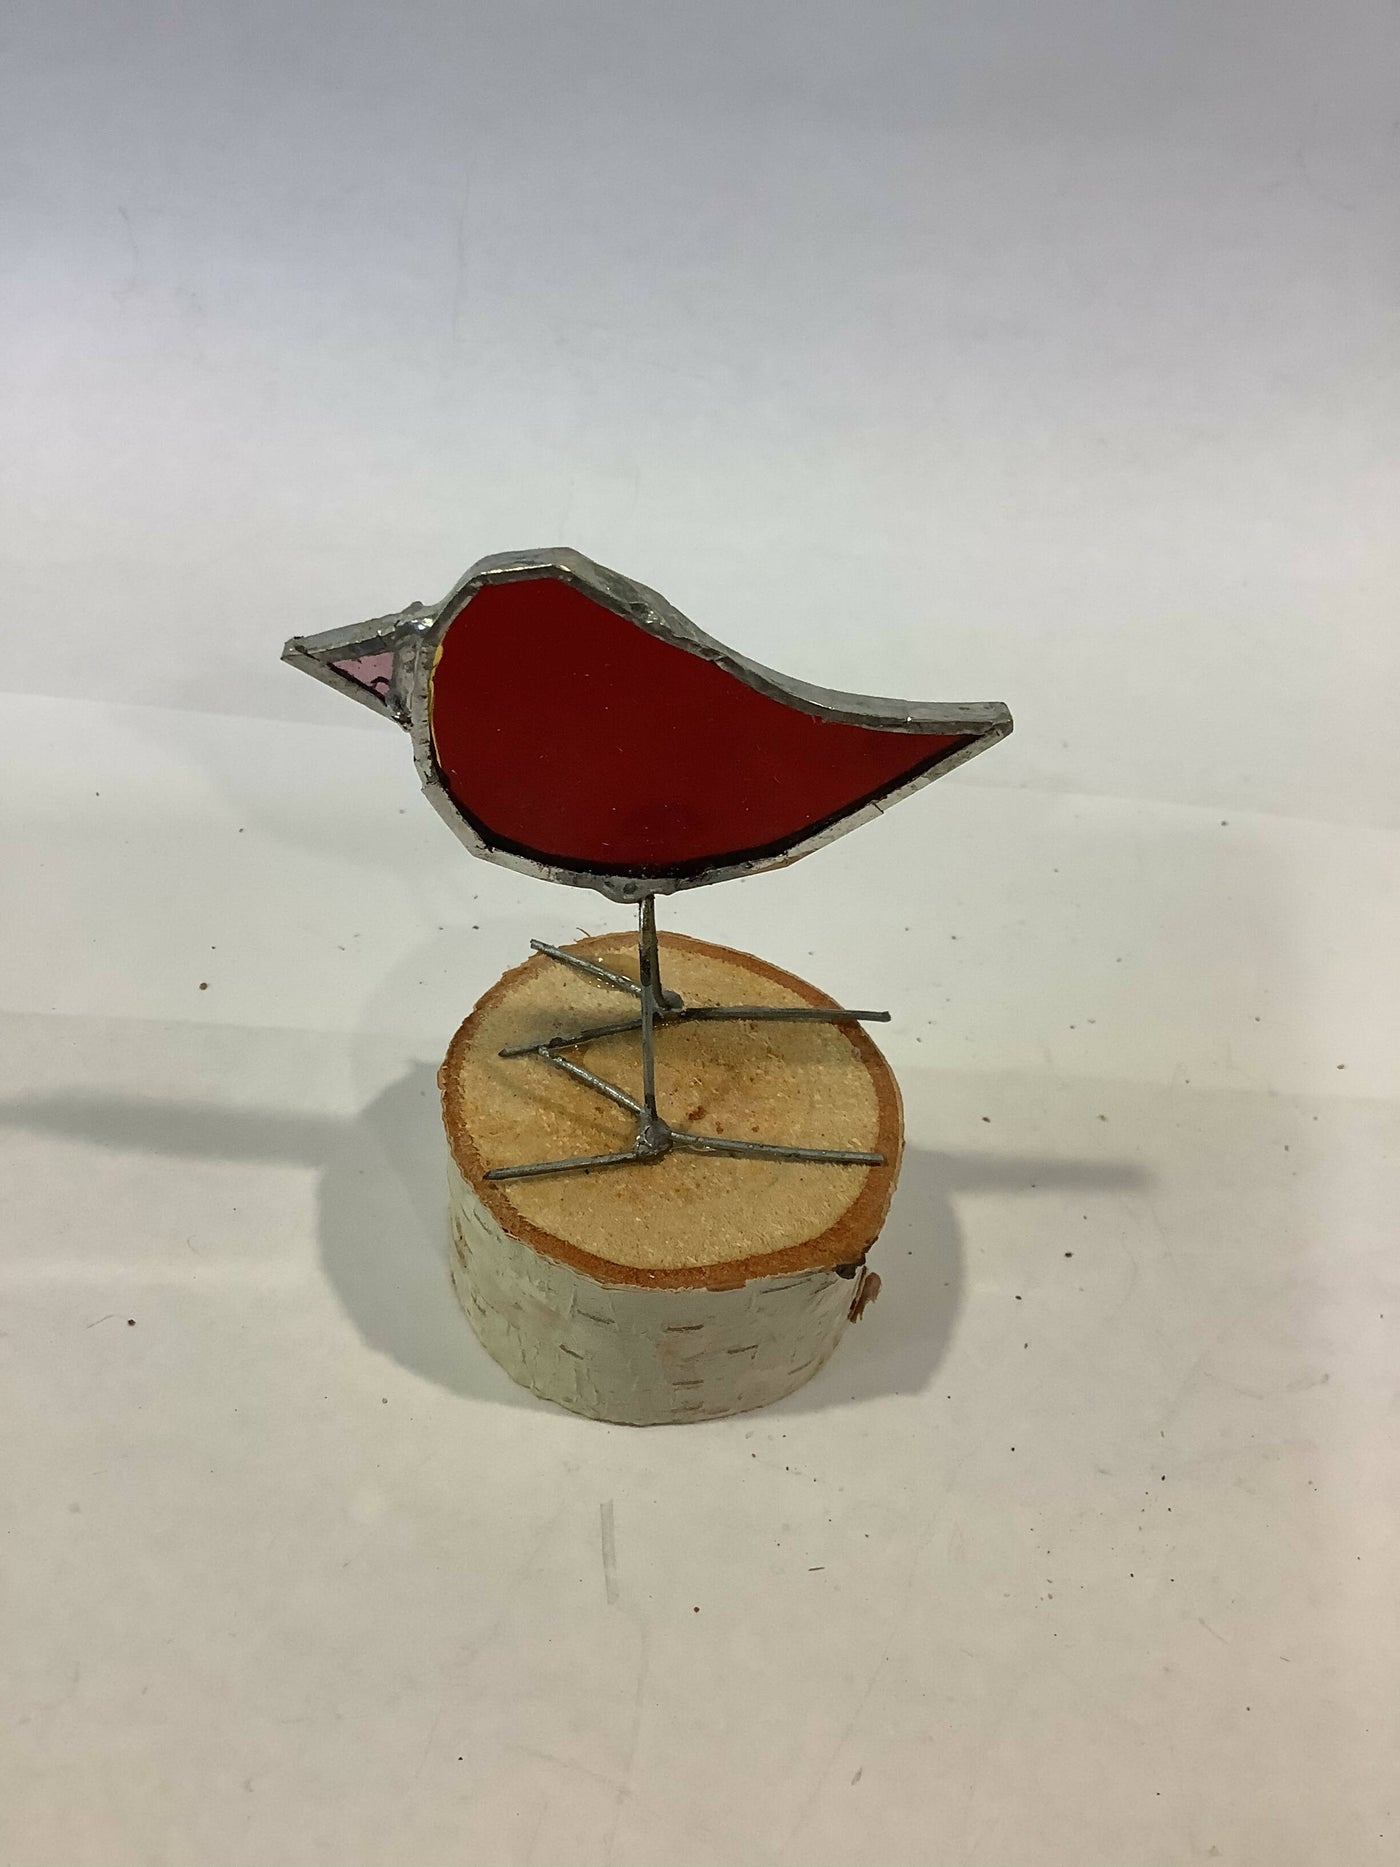 Perched Stained Glass Bird